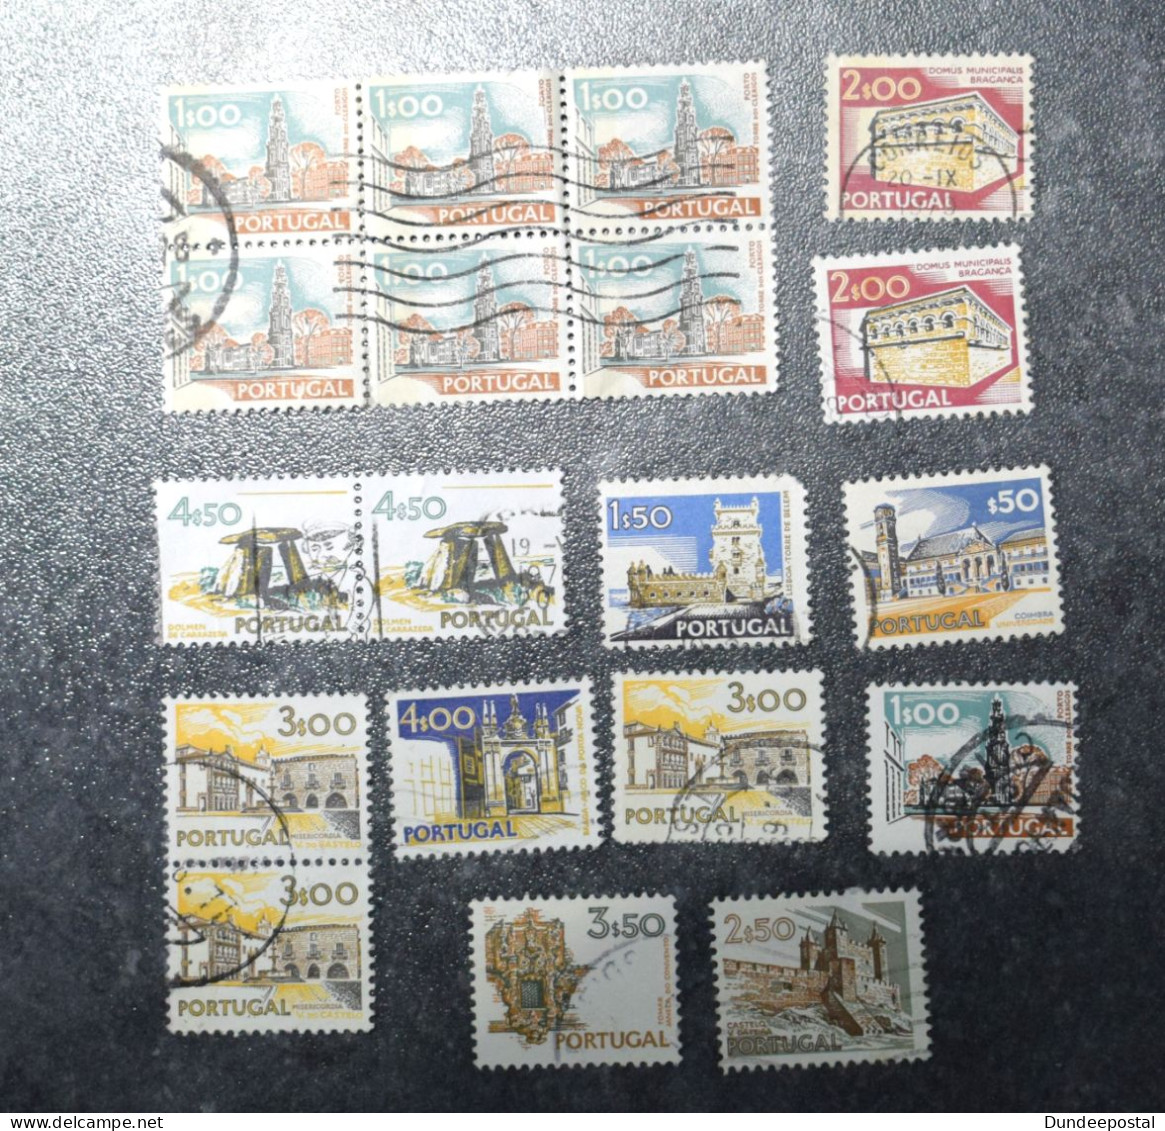 PORTUGAL STAMPS  Portugal Cities And Landscapes  1953 ~~L@@K~~ - Gebruikt